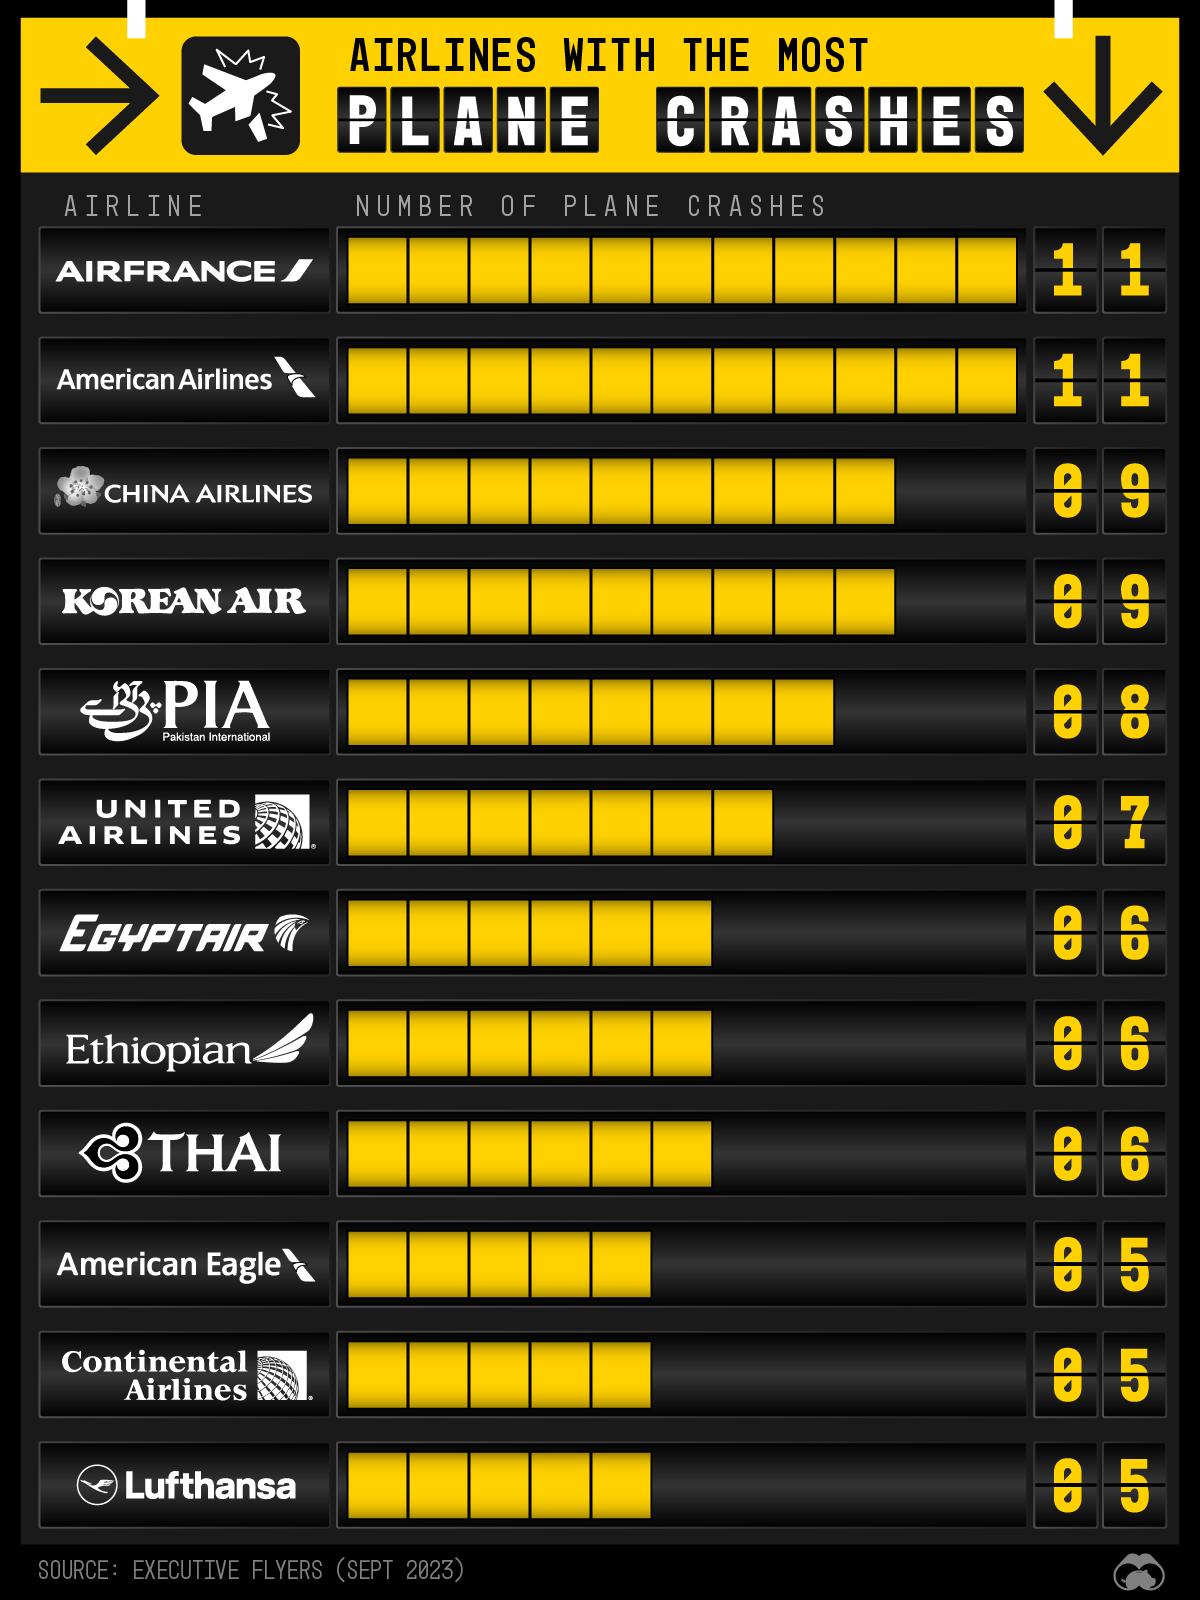 Air France and American Airlines Are Tied for the Most Plane Crashes